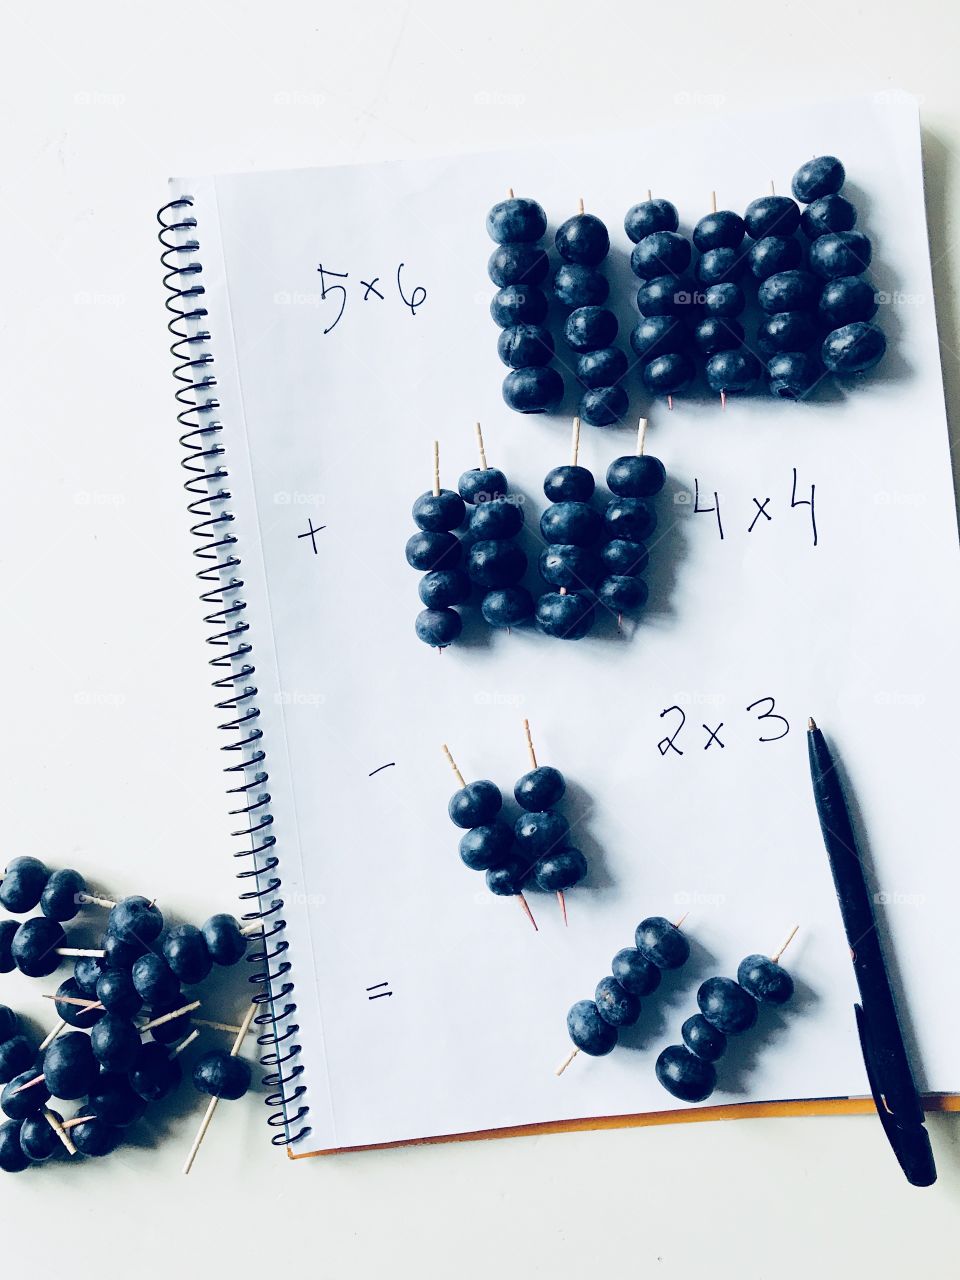 Counting with blueberries